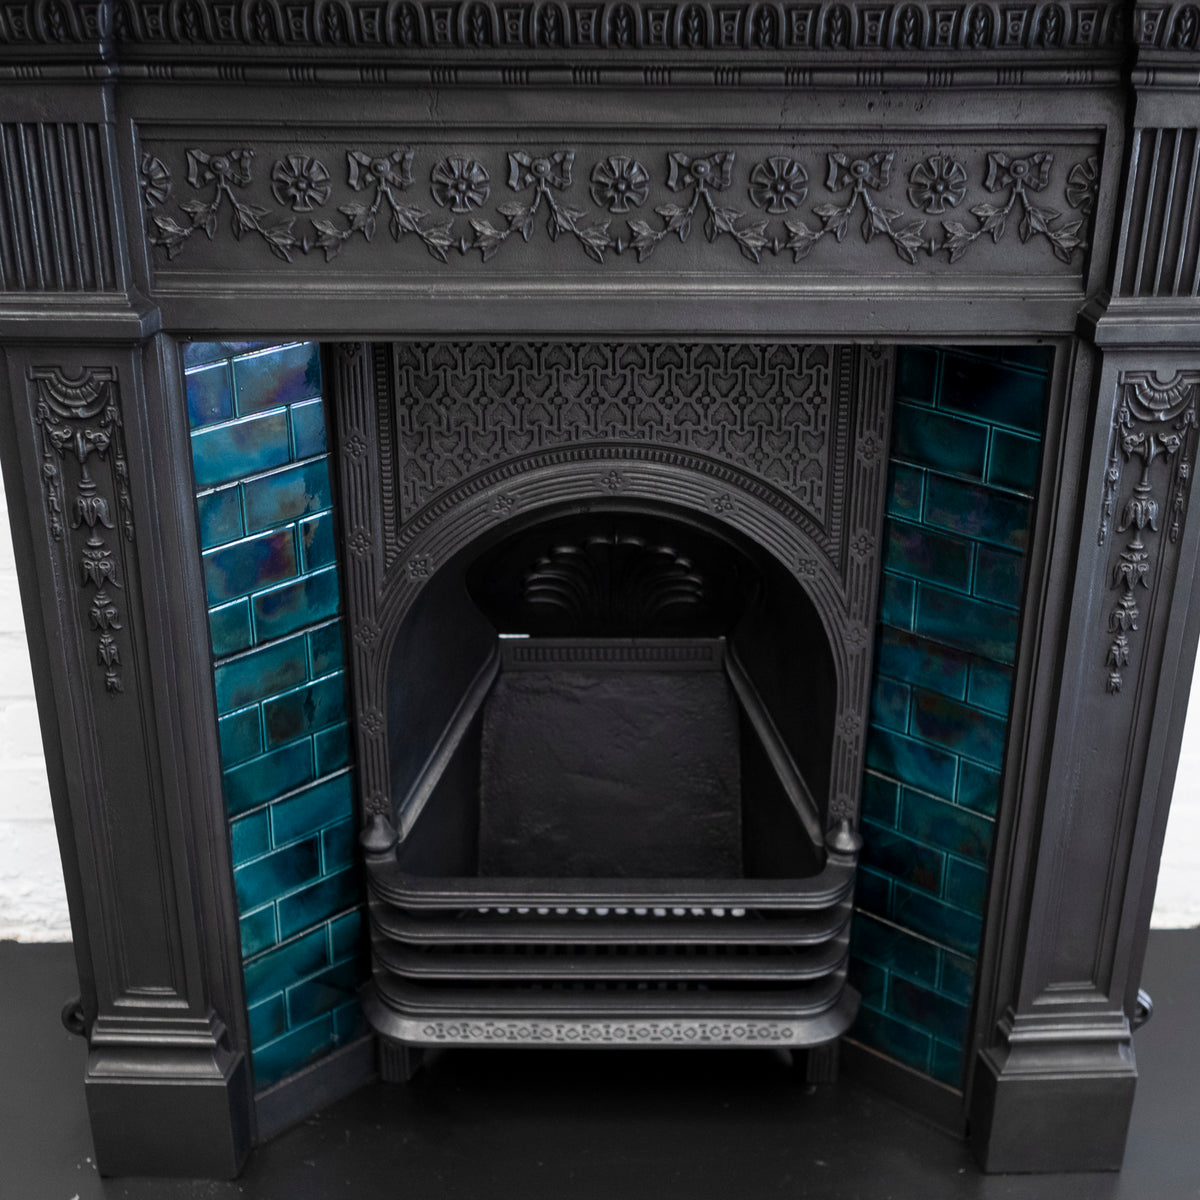 Antique Cast Iron Tiled Combination Fireplace with Tiles | The Architectural Forum